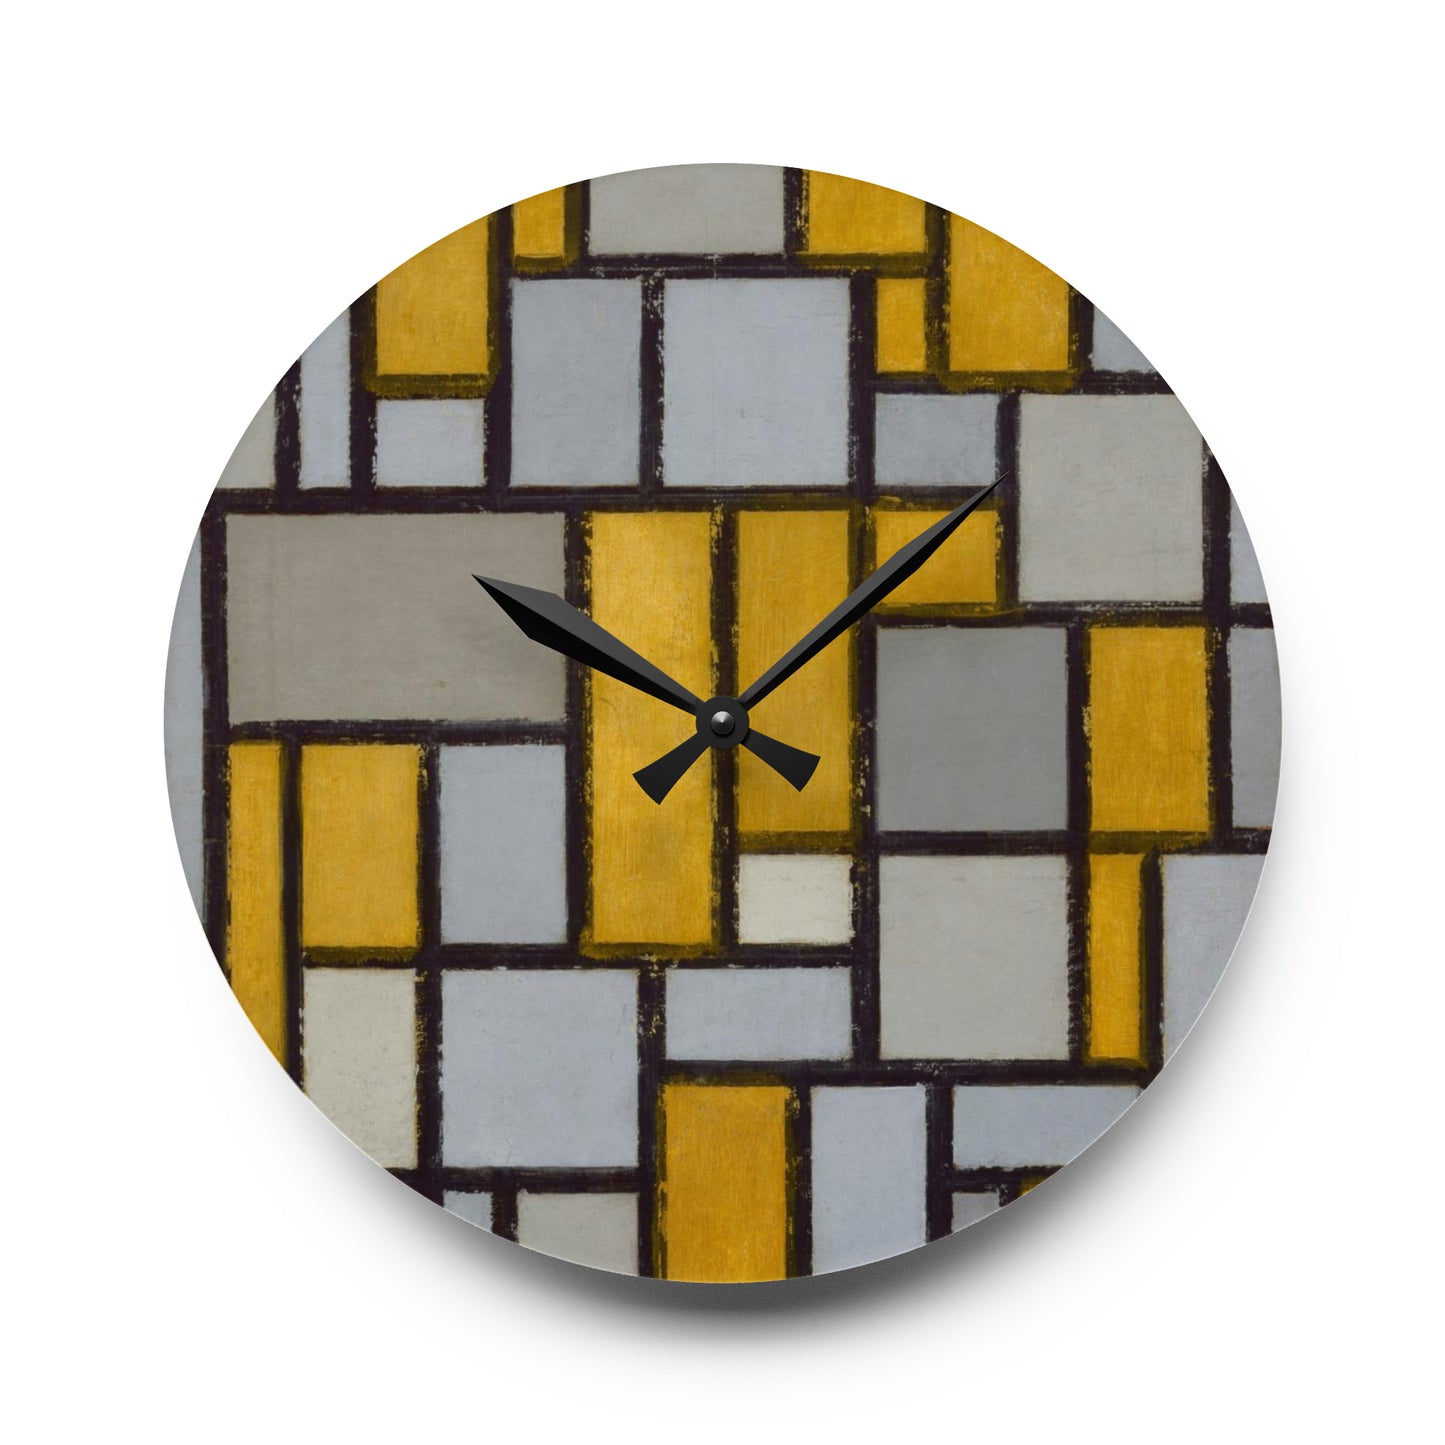 PIET MONDRIAN - COMPOSITION WITH GRID No. 1 - WALL CLOCK 